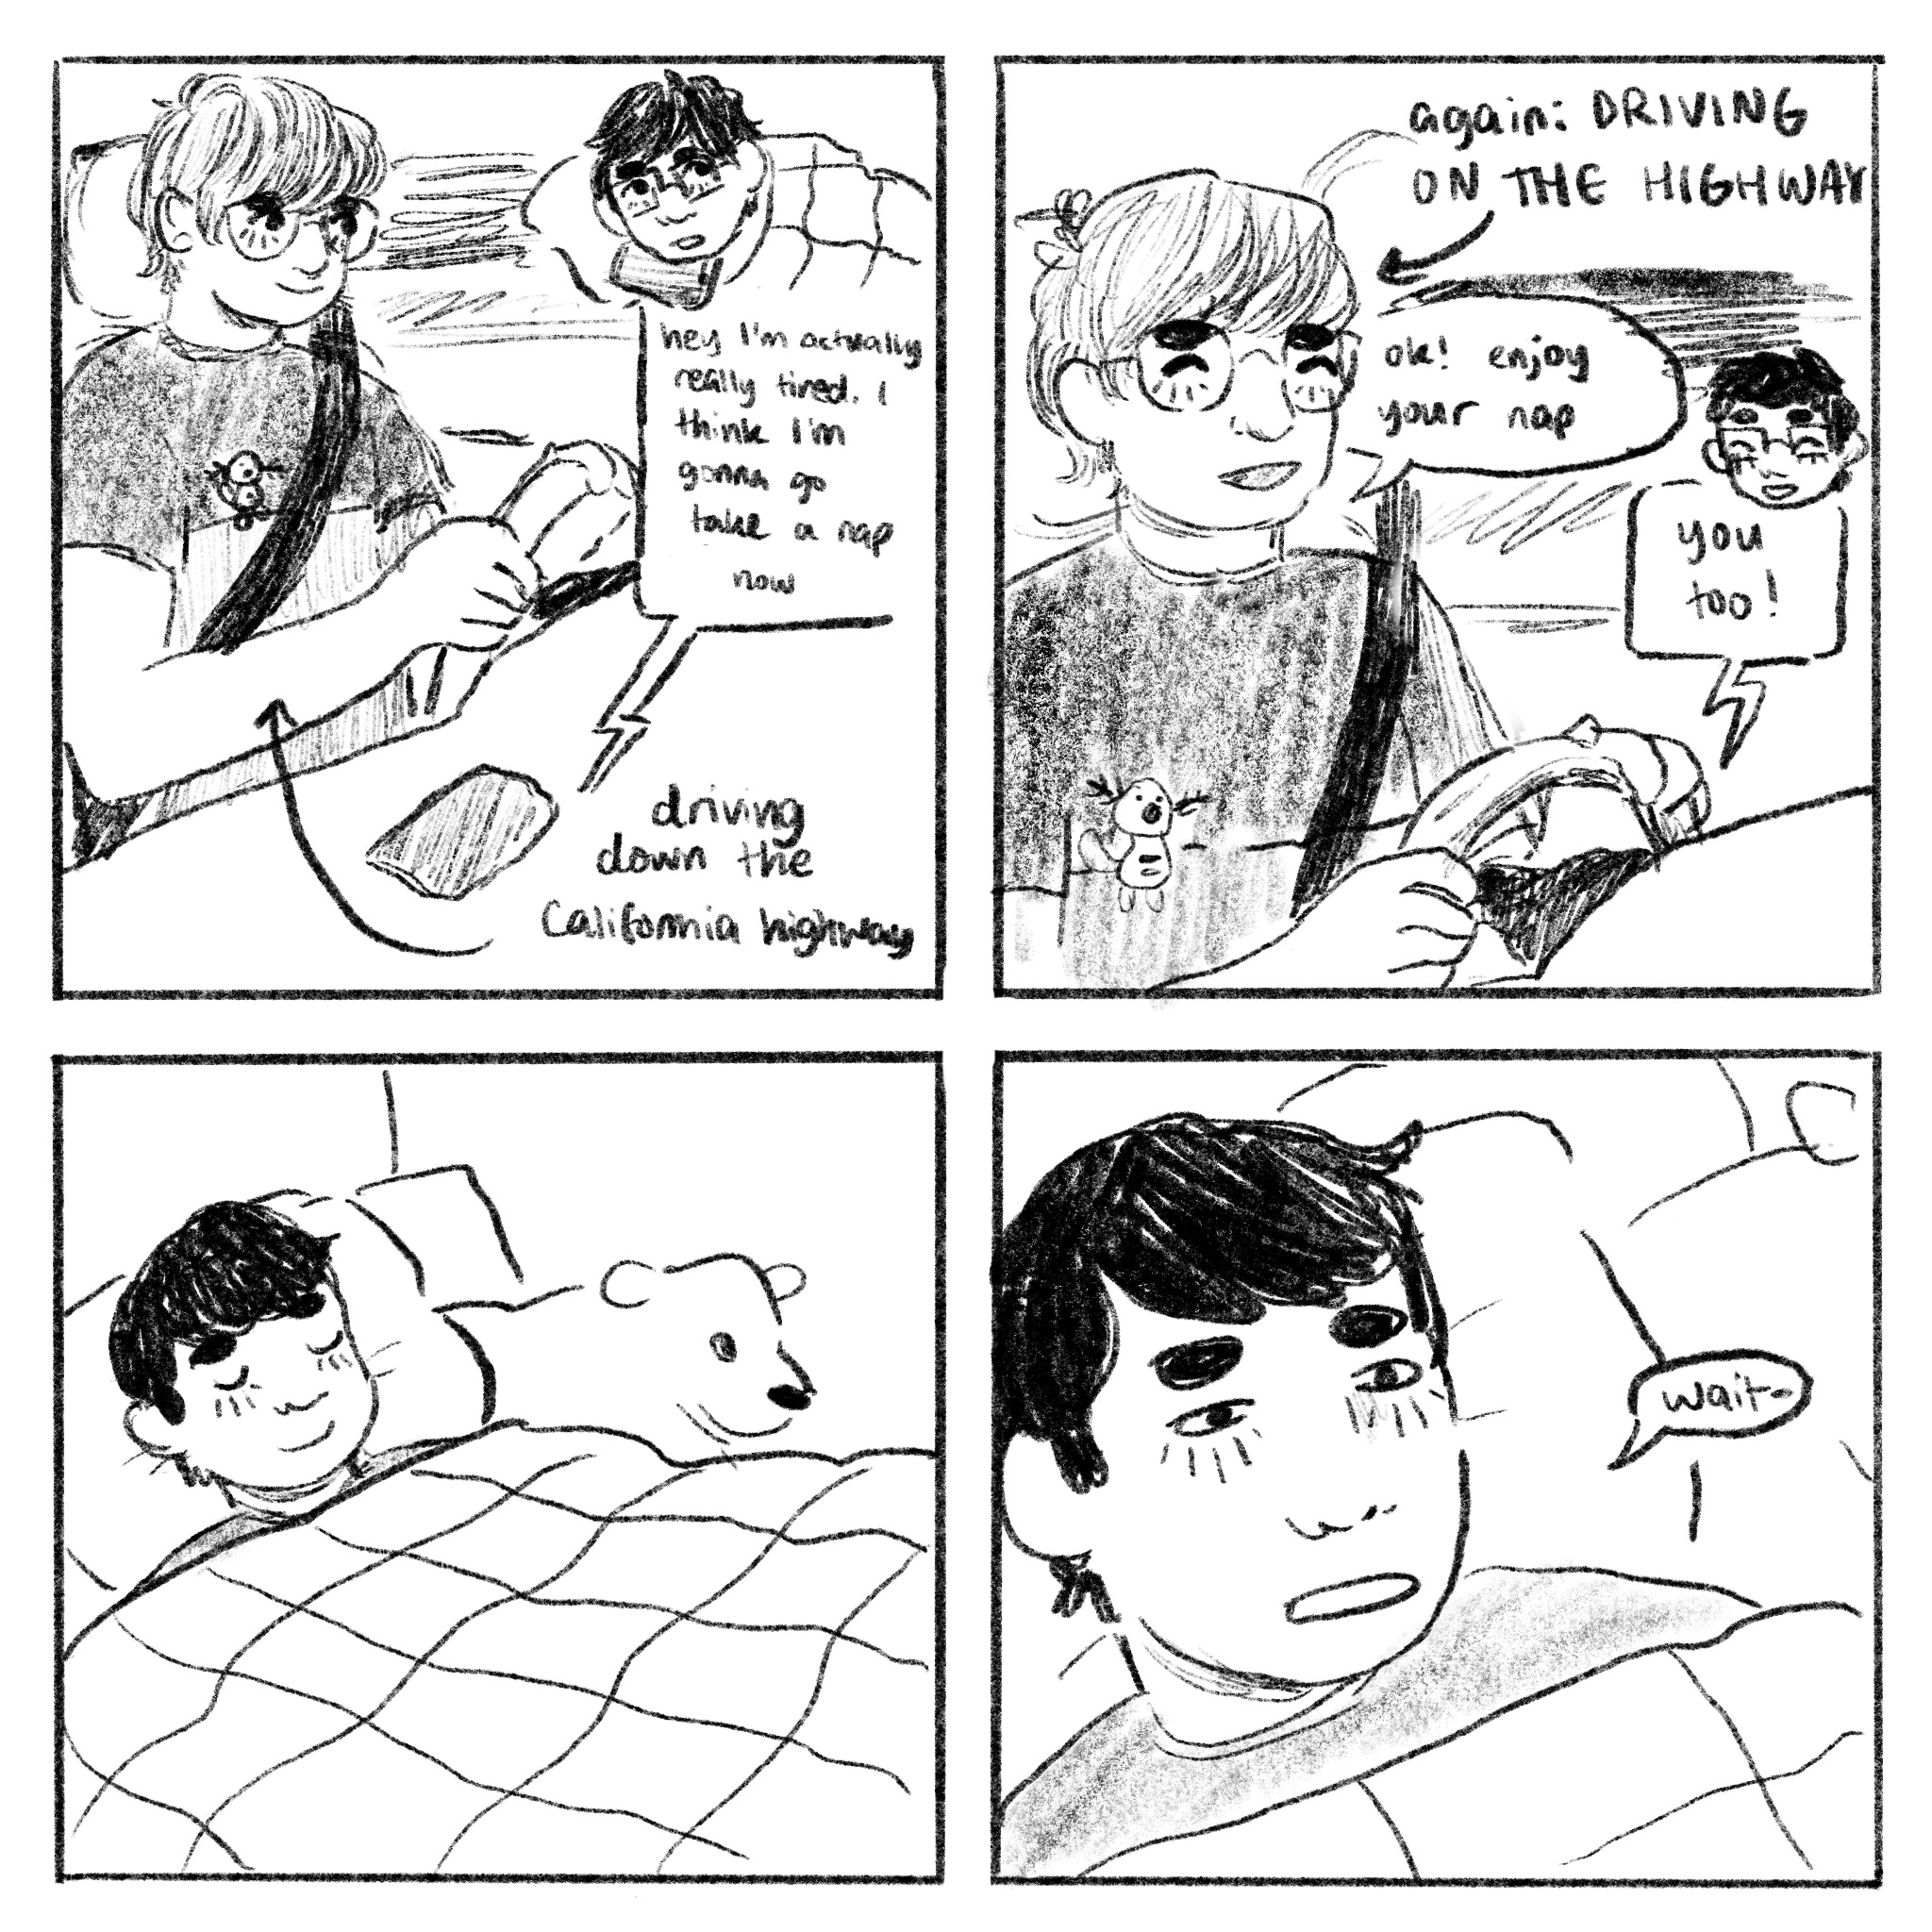 A comic about a funny experience with a friend.